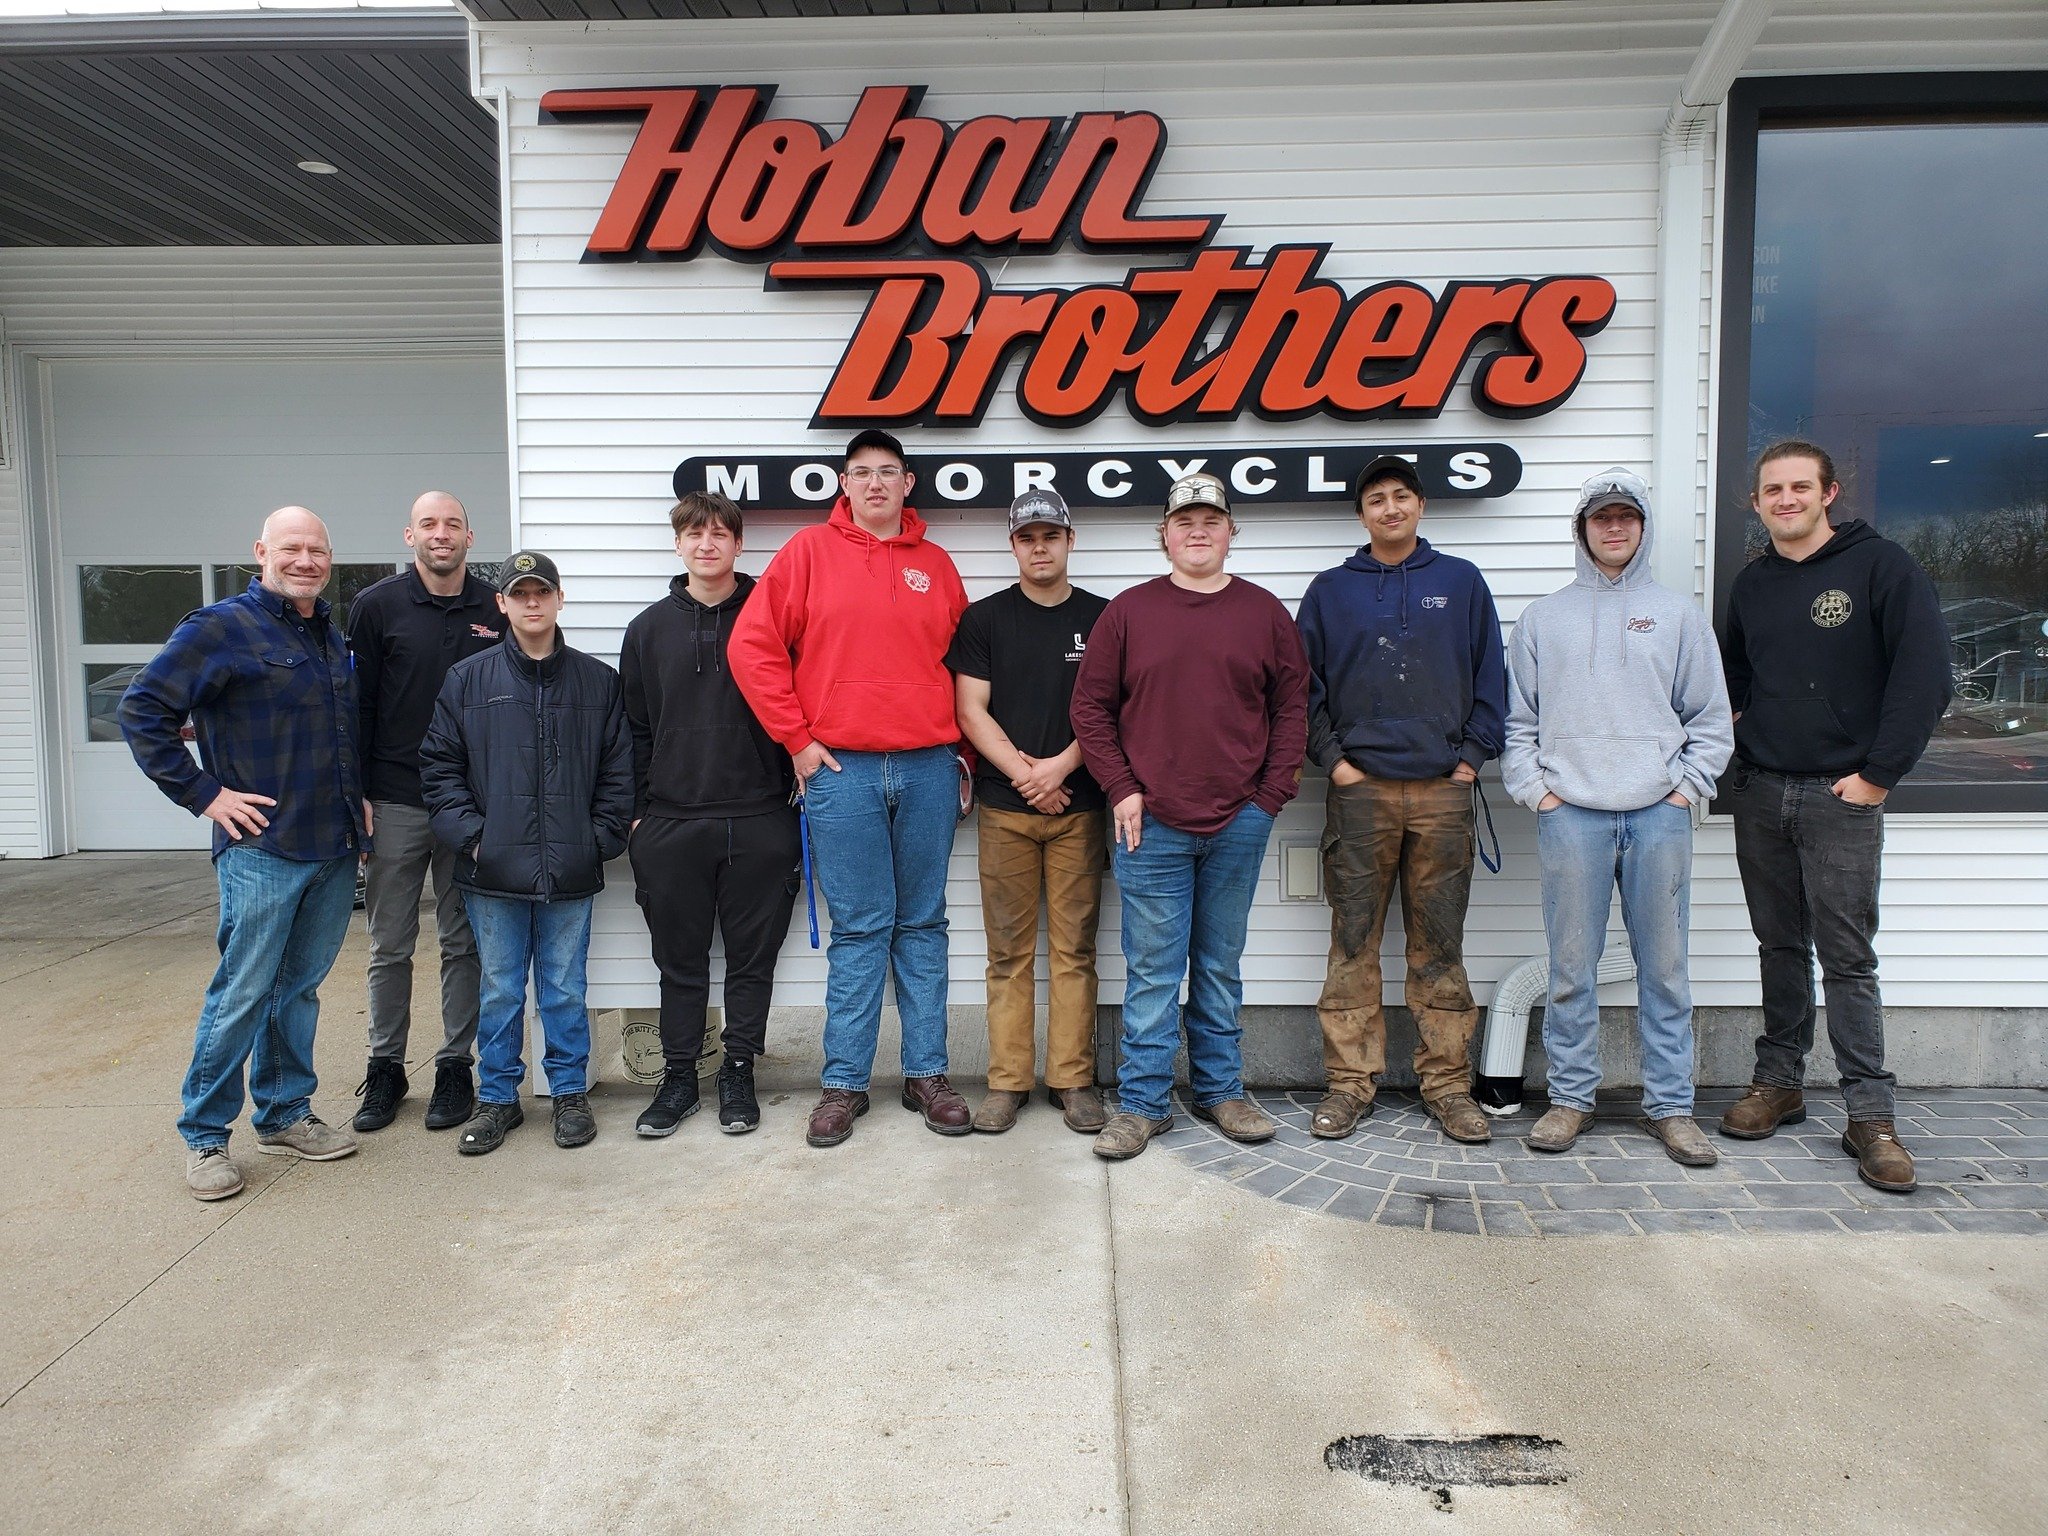 Awesome Tour at Hoban Brothers Motorcycles in Osman.  The class really enjoyed the innovation and the passion of the employees.  Thank you, John, Brad, and Tiger for a fun and enlightening morning.